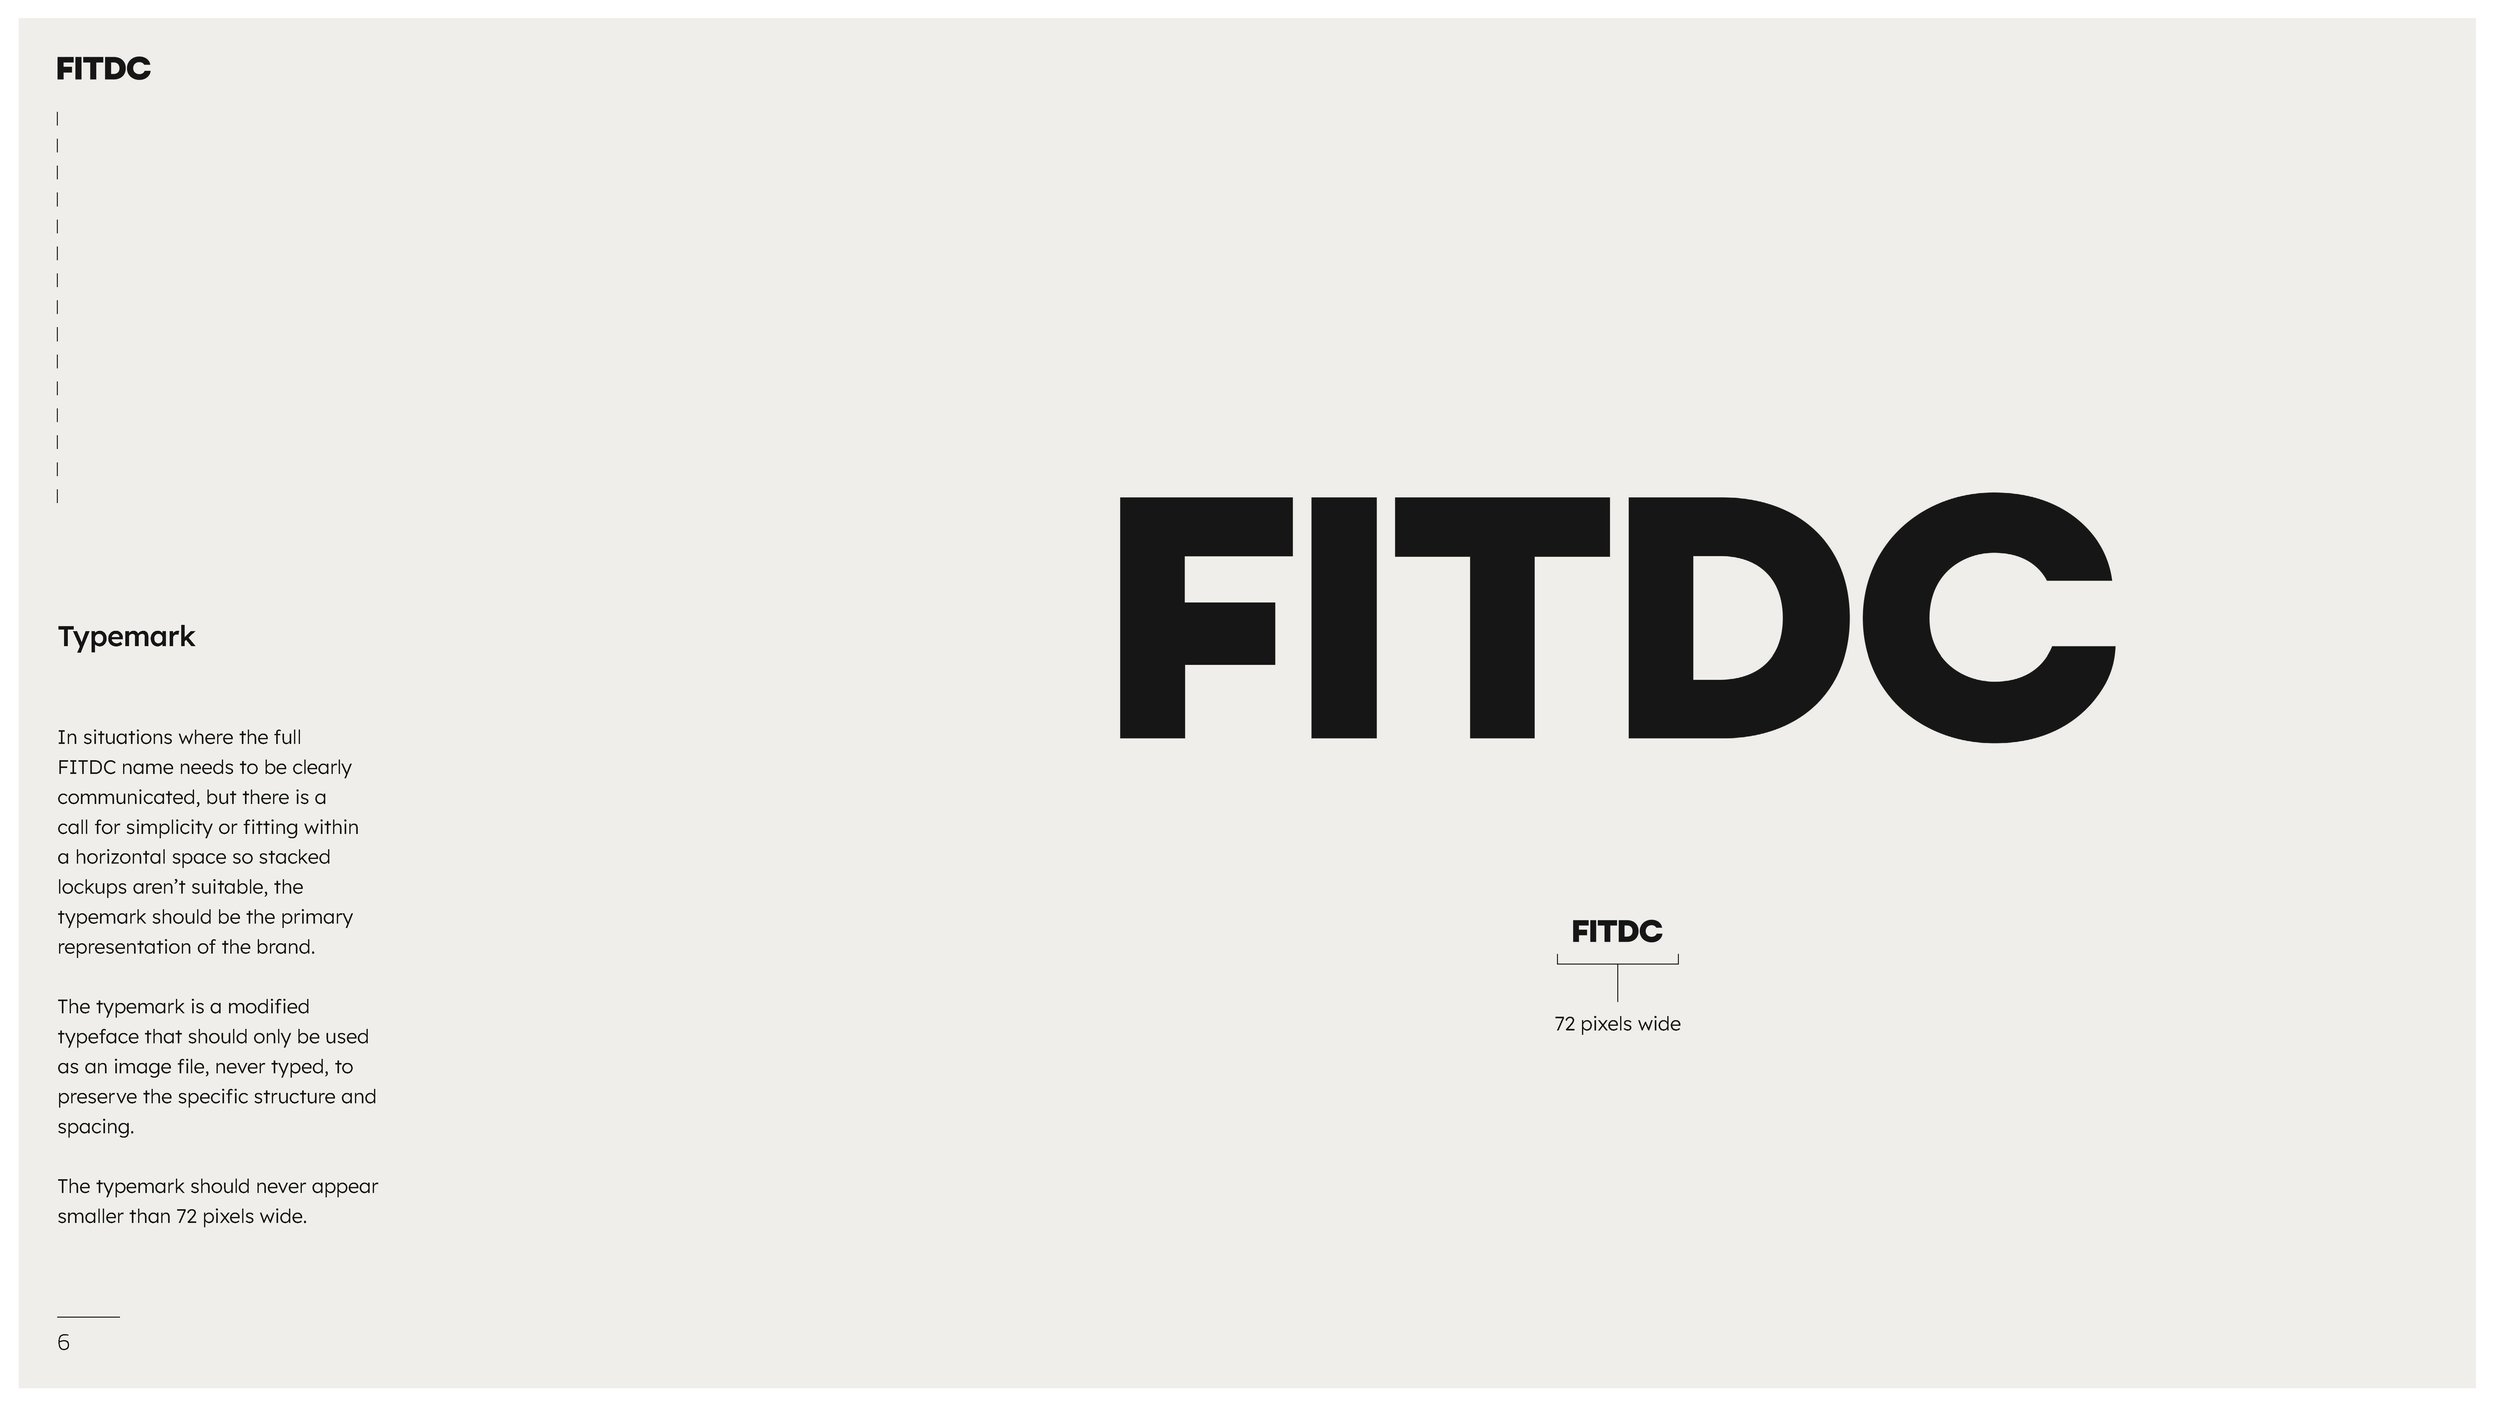 FITDC_Brand Guidelines_3.7_Page_06.jpg